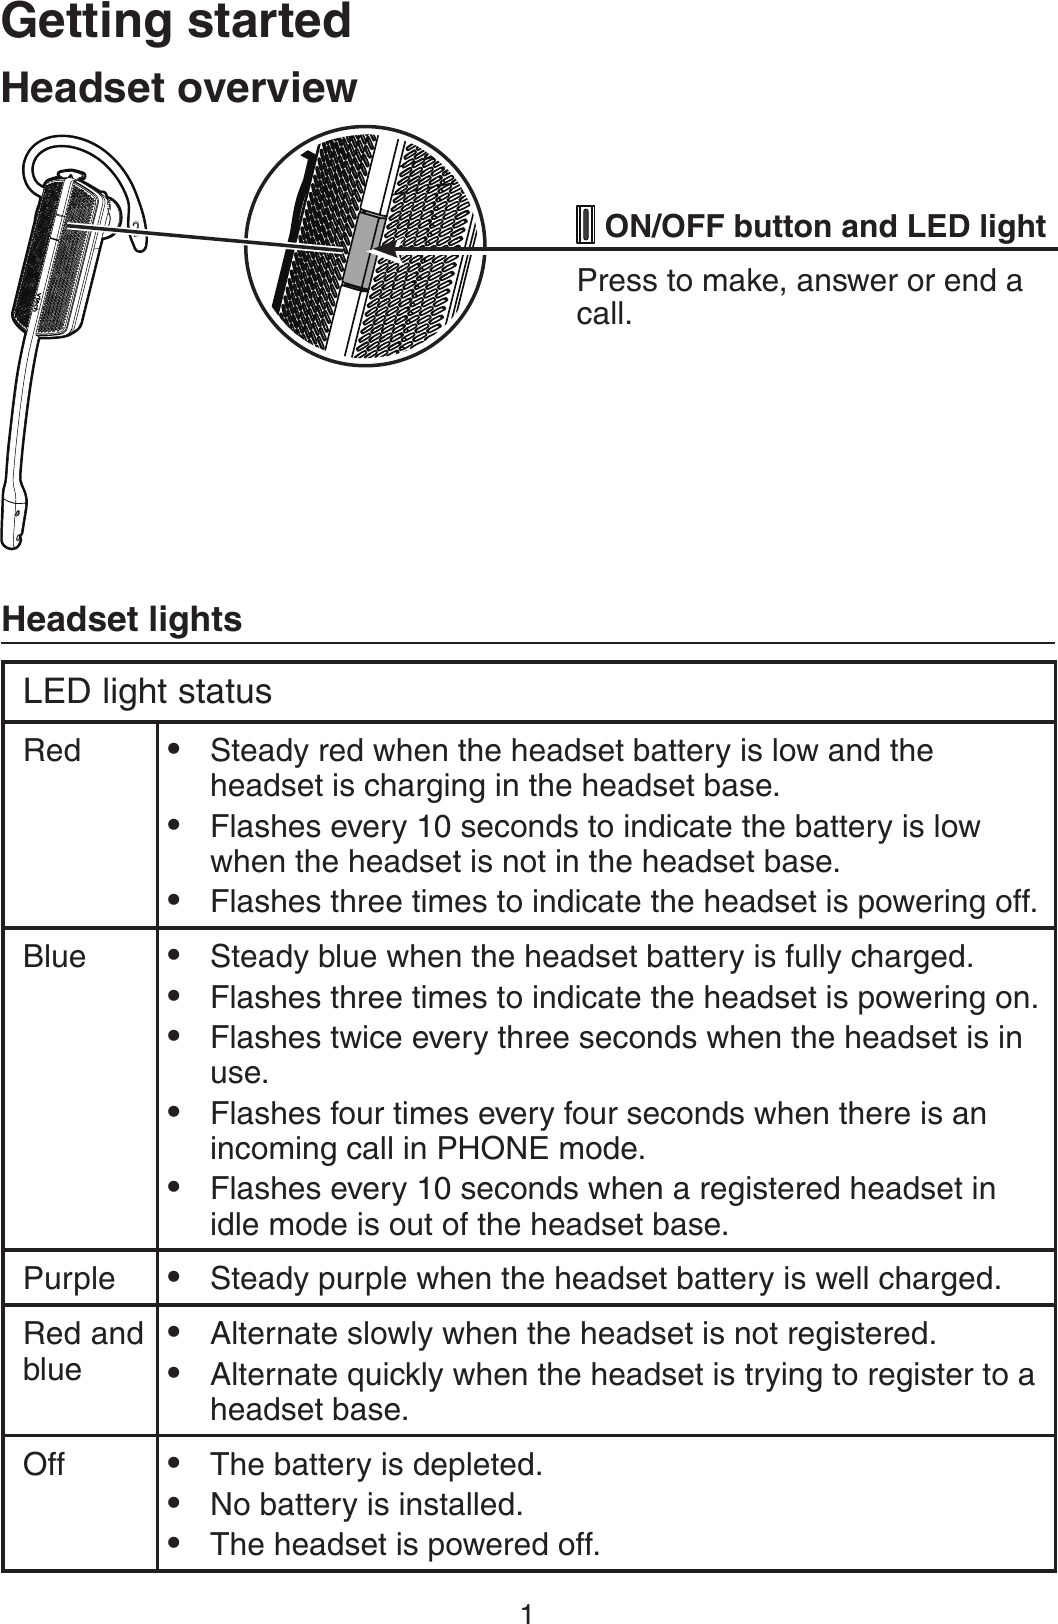 1(FUUJOHTUBSUFELED light statusRed Steady red when the headset battery is low and the headset is charging in the headset base.Flashes every 10 seconds to indicate the battery is low when the headset is not in the headset base.Flashes three times to indicate the headset is powering off. •••Blue Steady blue when the headset battery is fully charged.Flashes three times to indicate the headset is powering on.Flashes twice every three seconds when the headset is in use. Flashes four times every four seconds when there is an incoming call in PHONE mode. Flashes every 10 seconds when a registered headset in idle mode is out of the headset base.•••••Purple Steady purple when the headset battery is well charged.•Red and blueAlternate slowly when the headset is not registered.Alternate quickly when the headset is trying to register to a headset base.••Off The battery is depleted.No battery is installed.The headset is powered off.•••)FBETFUPWFSWJFX)FBETFUMJHIUT0/0&apos;&apos;CVUUPOBOE-&amp;%MJHIUPress to make, answer or end a call.